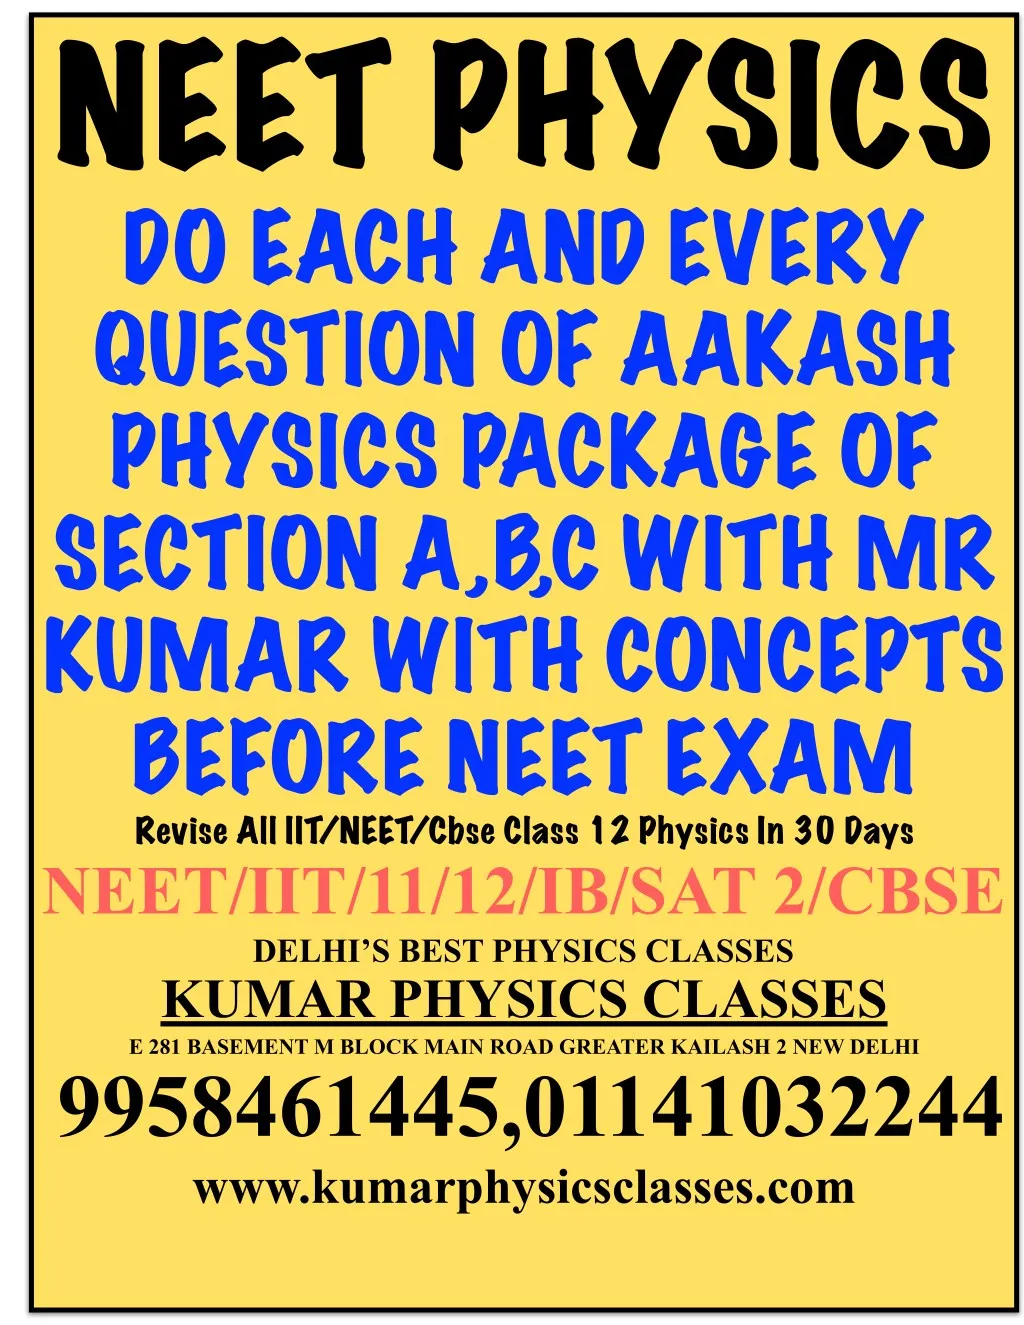 neet physics do each and every question of aakash